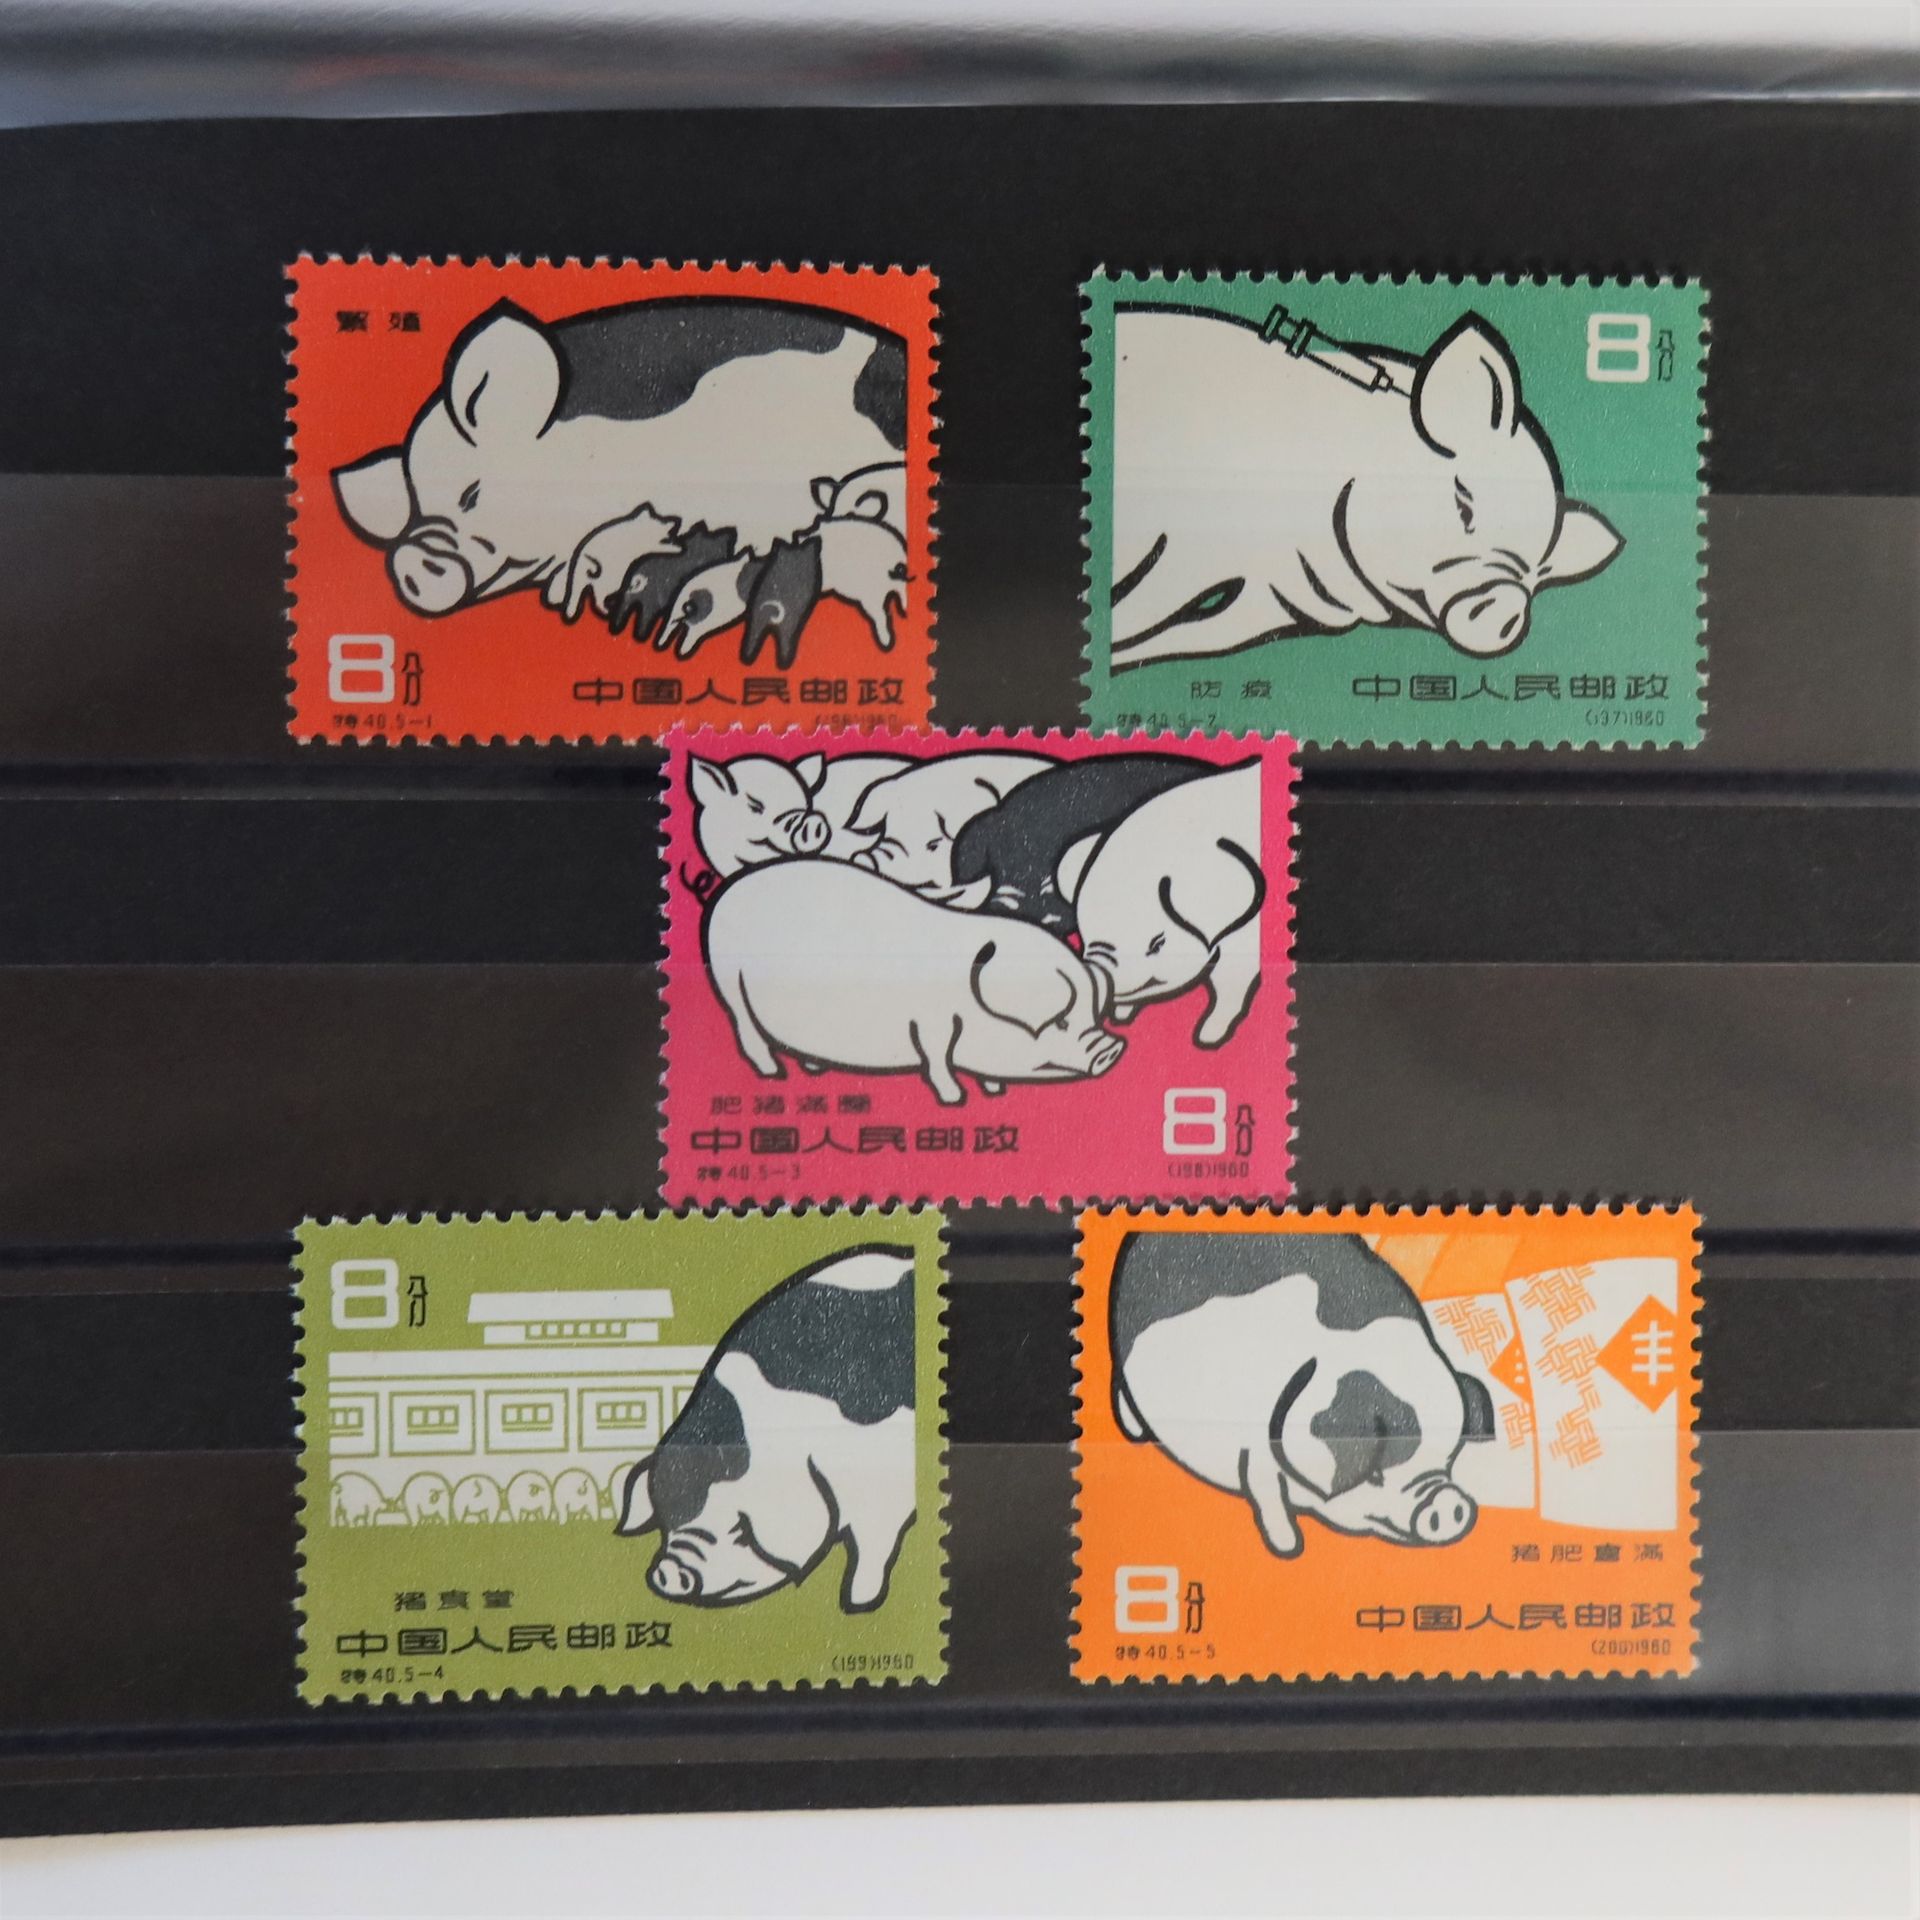 Null [CHINA]
Superb complete set n° 1304 to 1308 "Pig breeding", new, luxury.